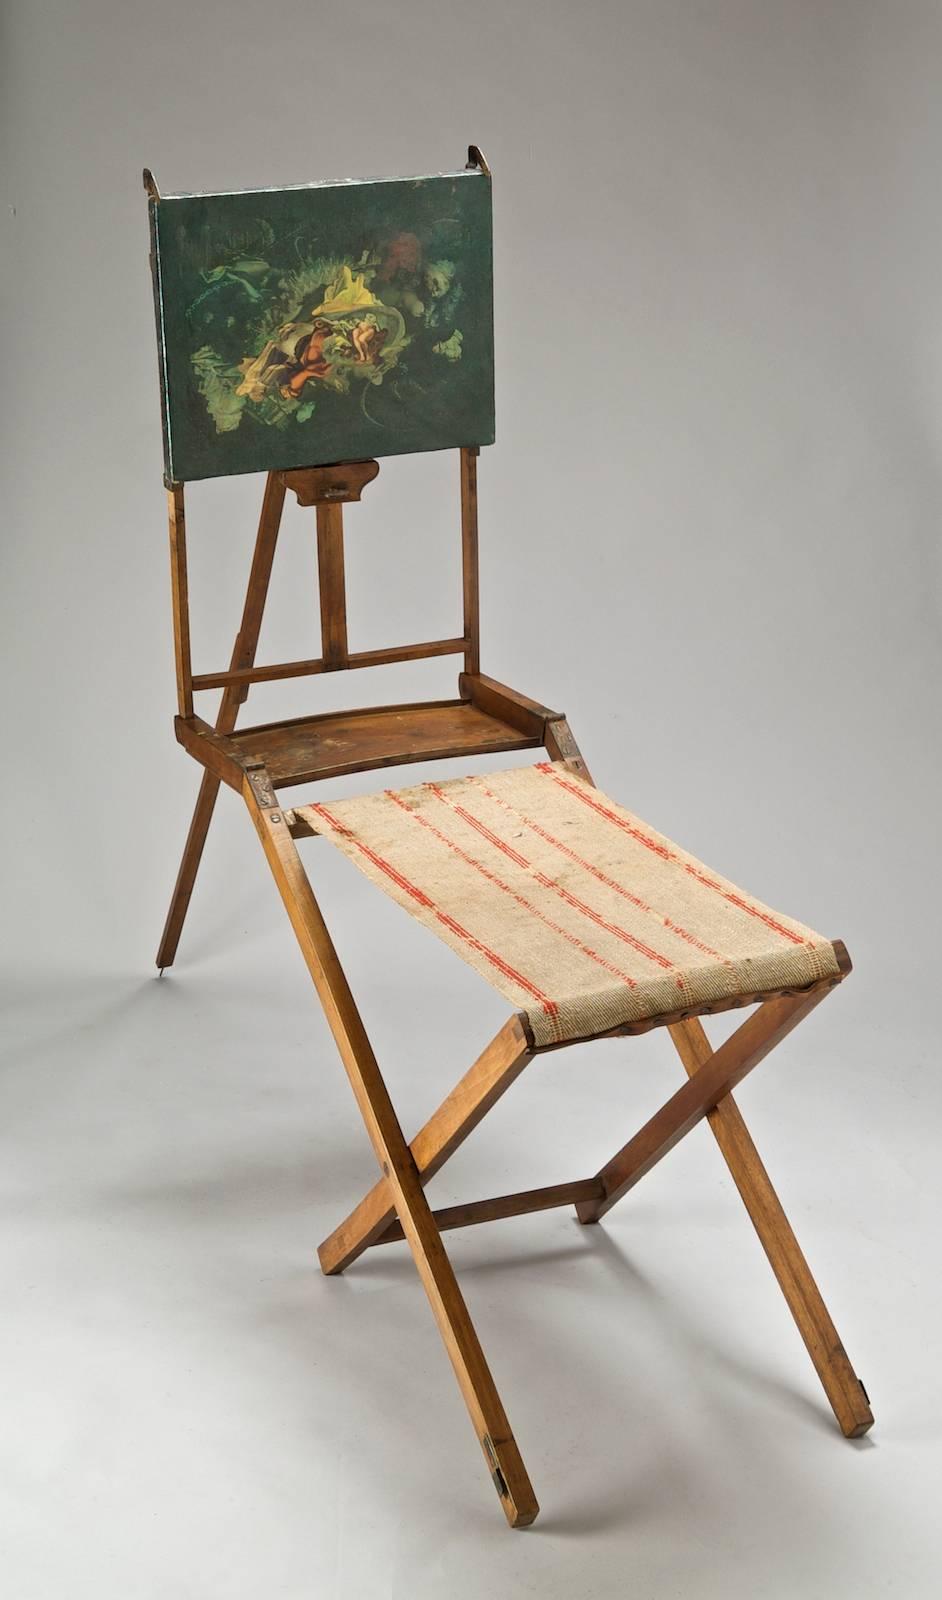 Rare small easel used for outside folding, portable, with a burlape seat, France, 19th century 
Dimensions: Folded height: 68 cm, height deployed: 120cm - seat 56 X 34 X H 46.
 